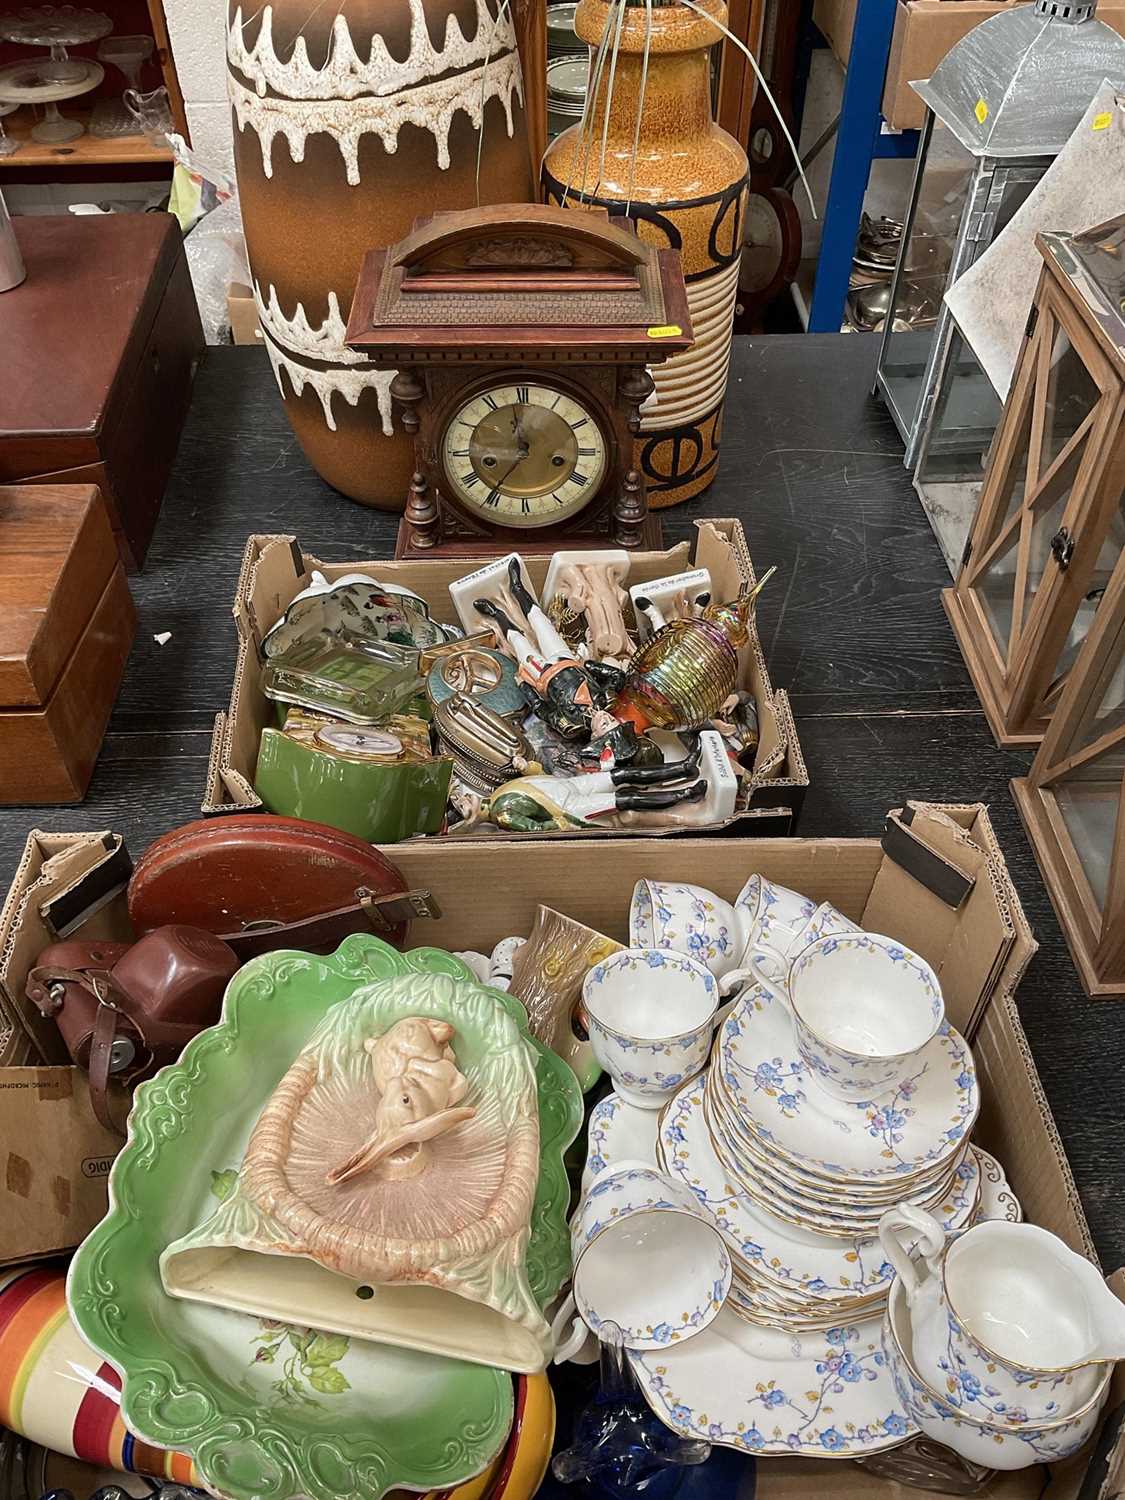 Lot 145 - Royal Albert tea set together with other ceramics and glass, a German mantel clock and sundries